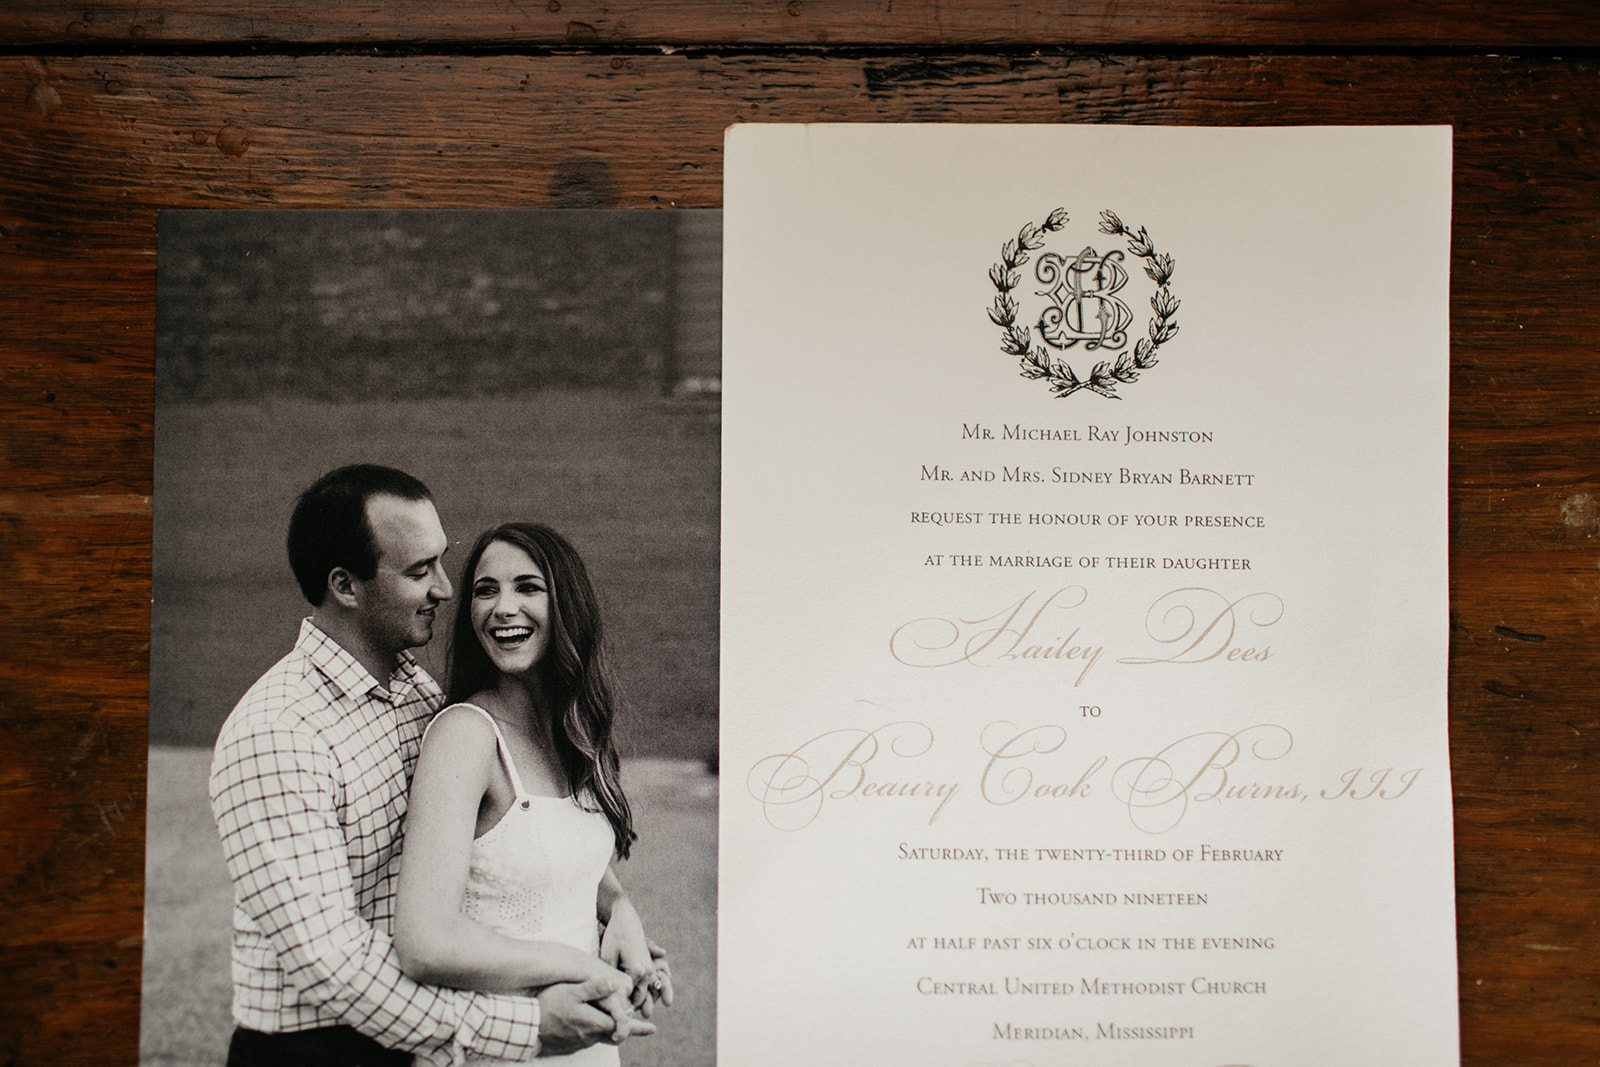 Mississippi Wedding Calligrapher Sterling Calligraphy